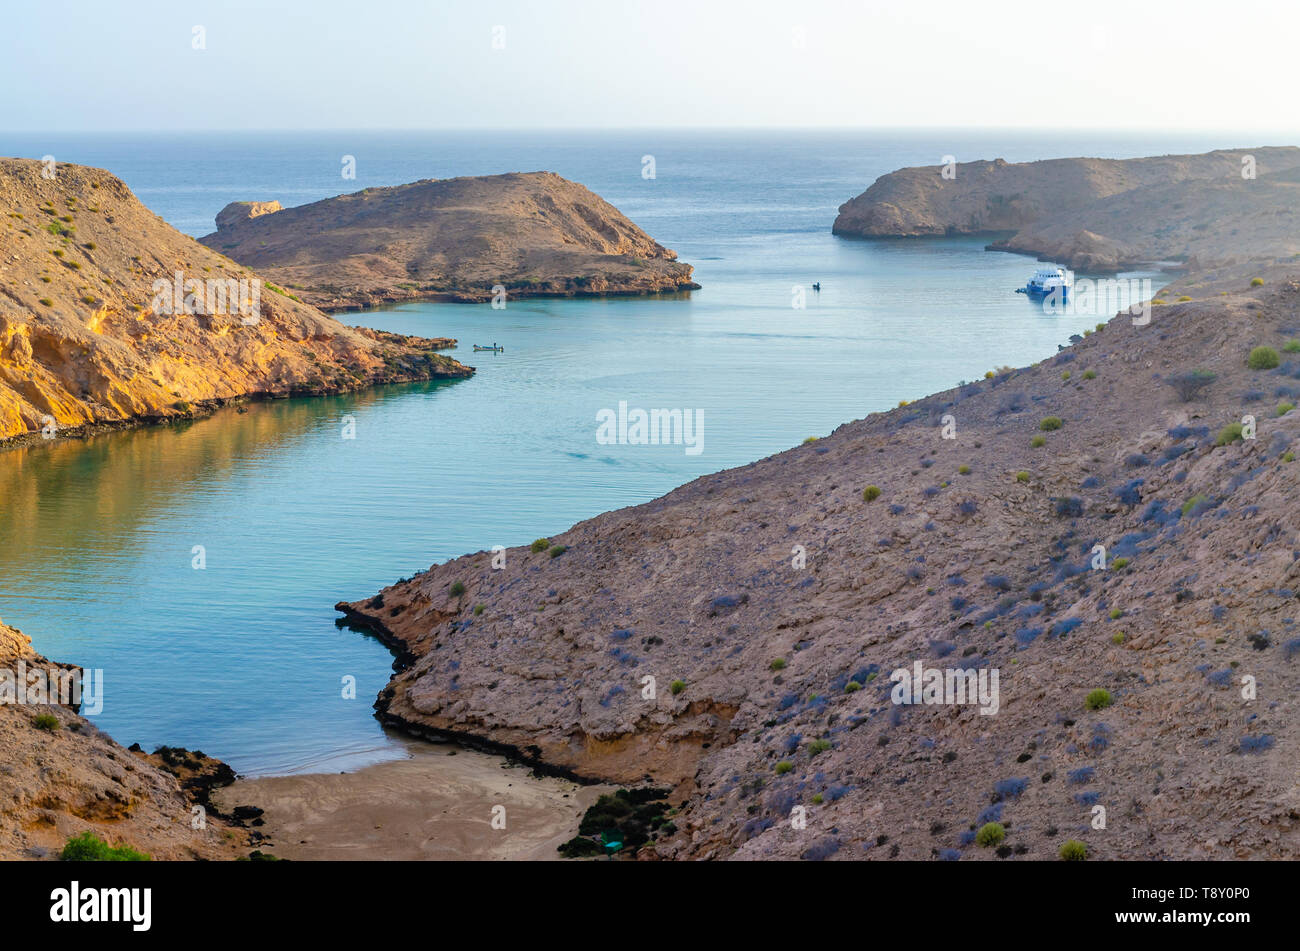 Typical Omani Landscape with brown soiled hills and a creek from the sea with turquoise water. Stock Photo